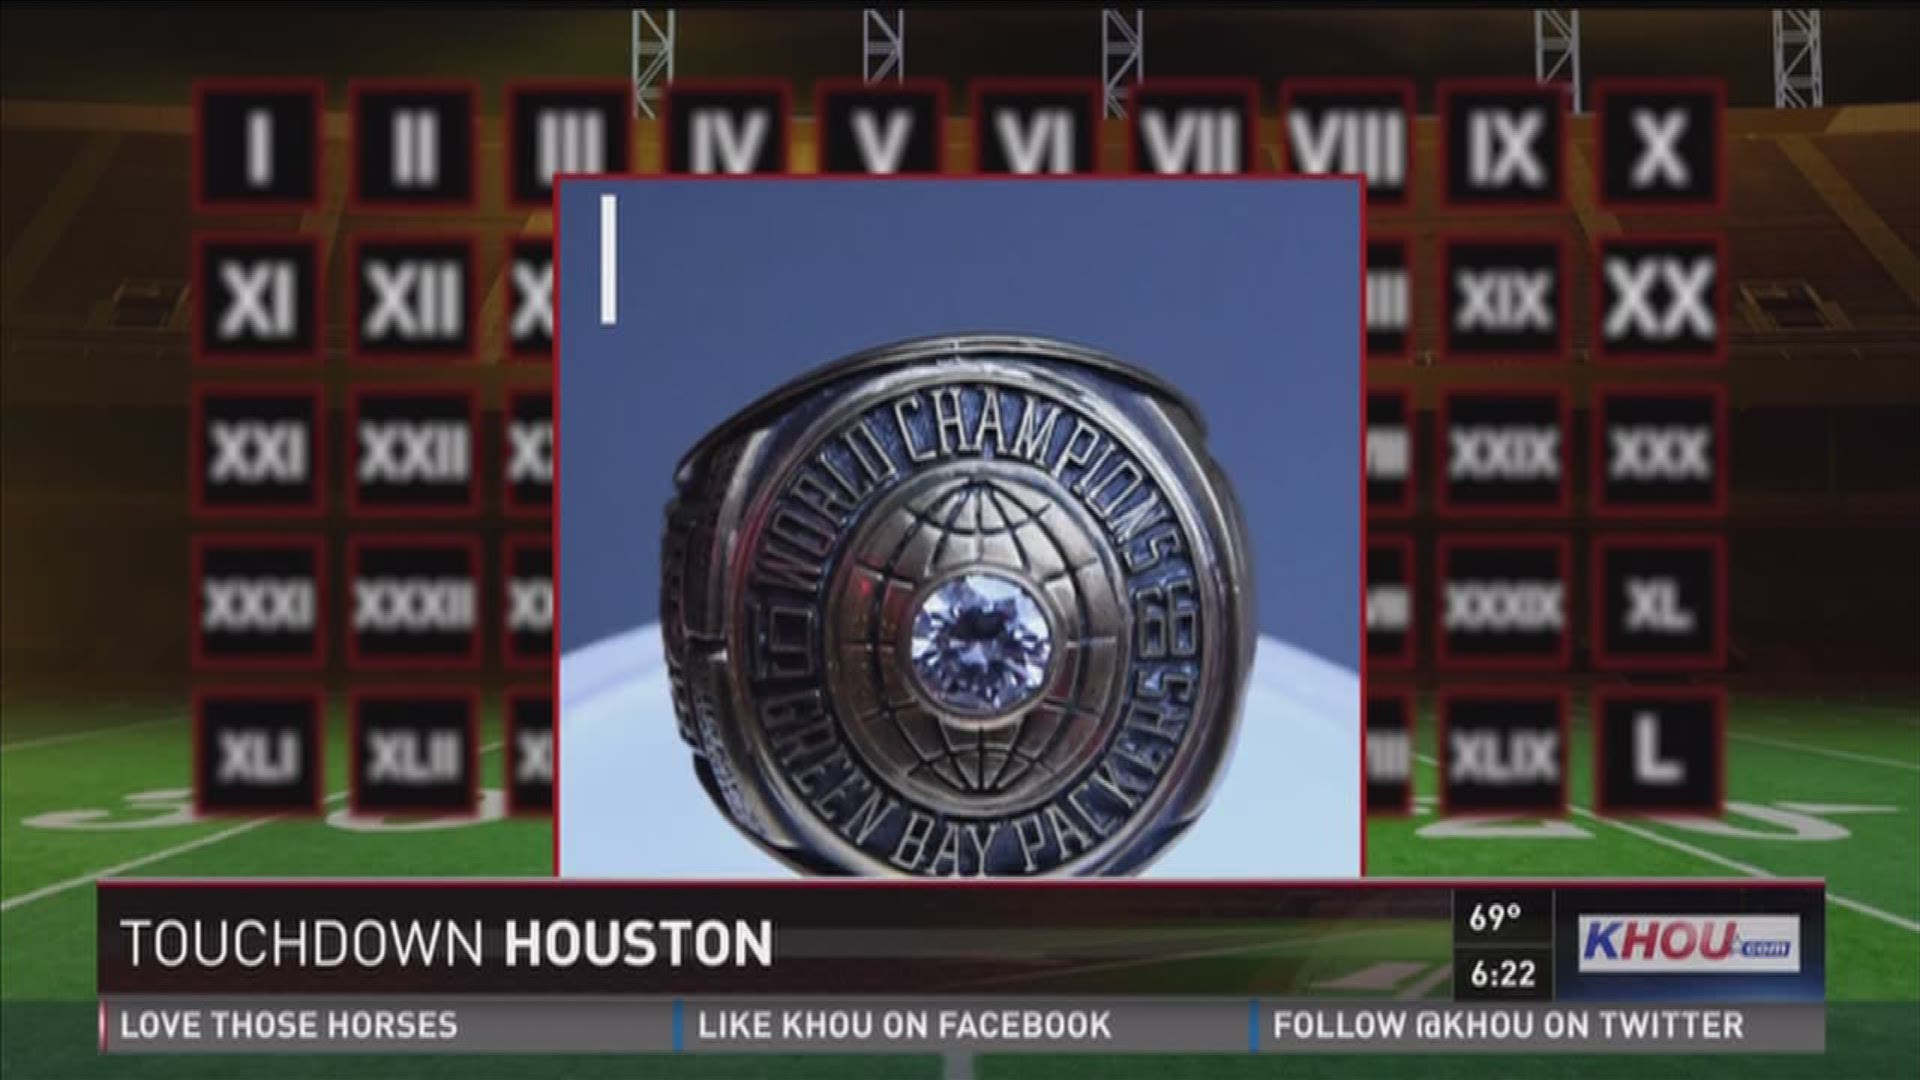 HOUSTON- Do you plan to attend any of the Super Bowl events? If so, KHOU 11 would like you to participate in our Super Bowl Rings Scavenger Hunt. 